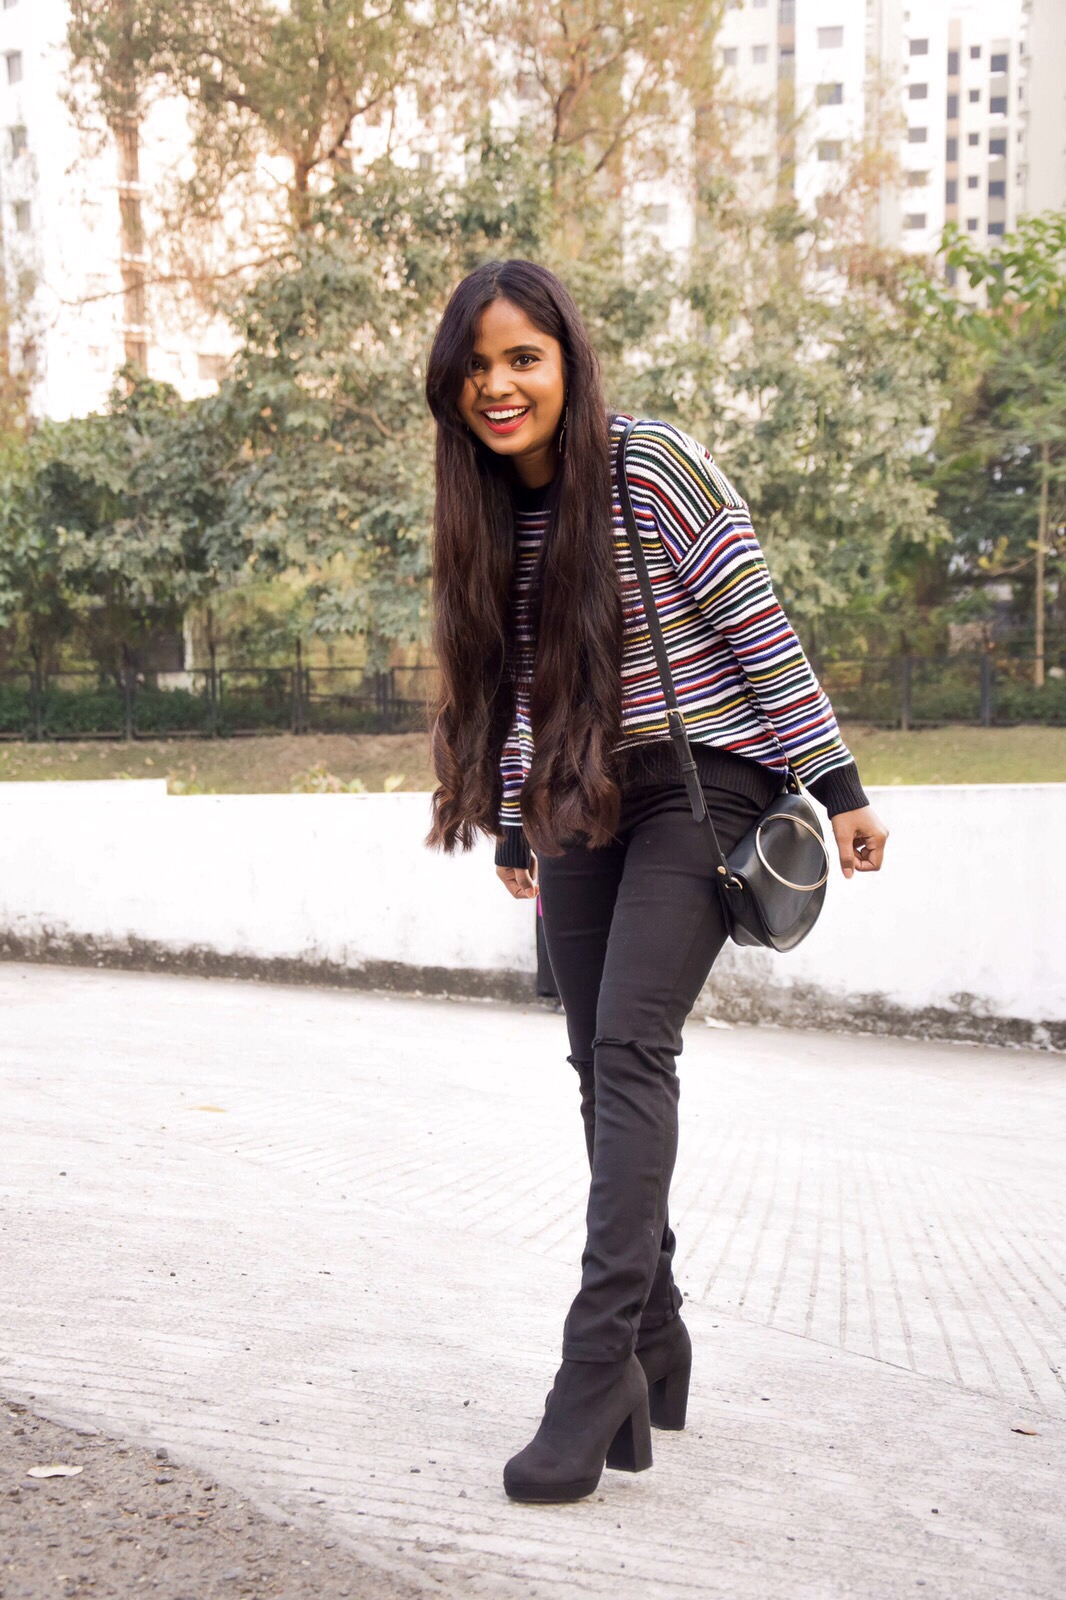 striped jumpers : 2 different styles with denims | Travelhues